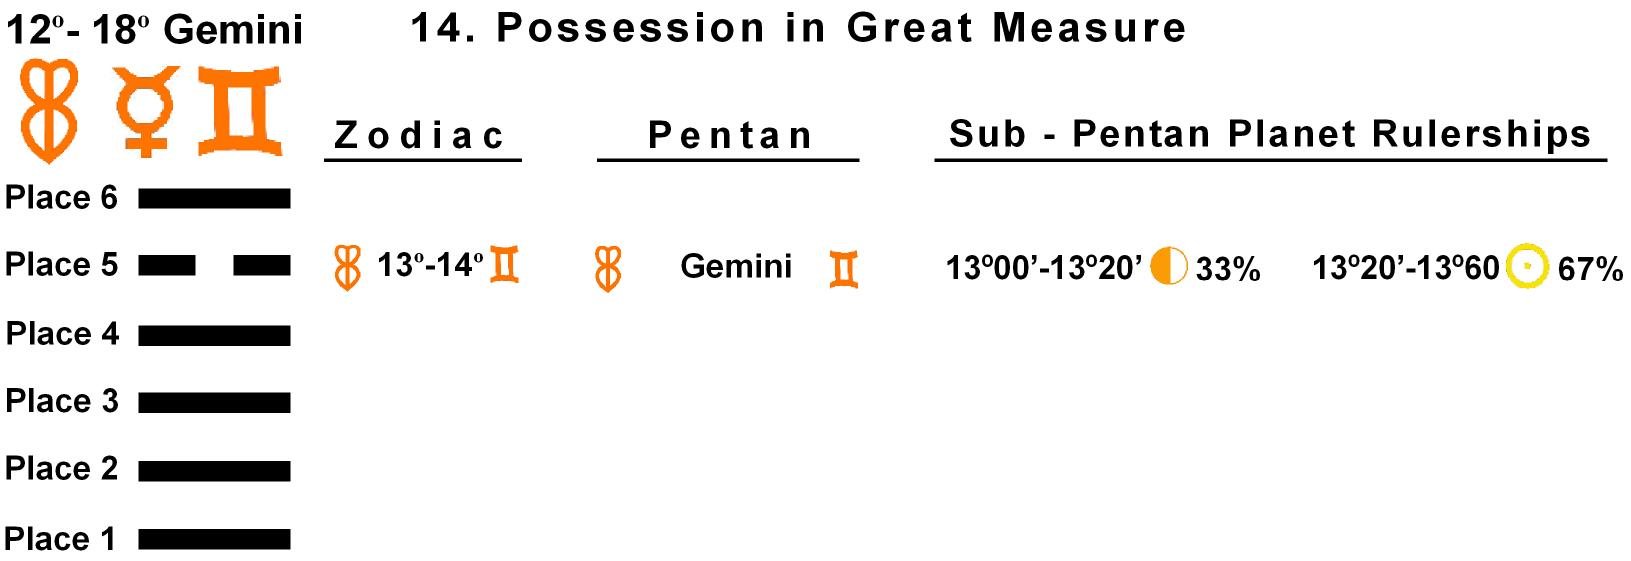 Pent-lines-03GE 13-14 Hx-14 Possession In Great Measure